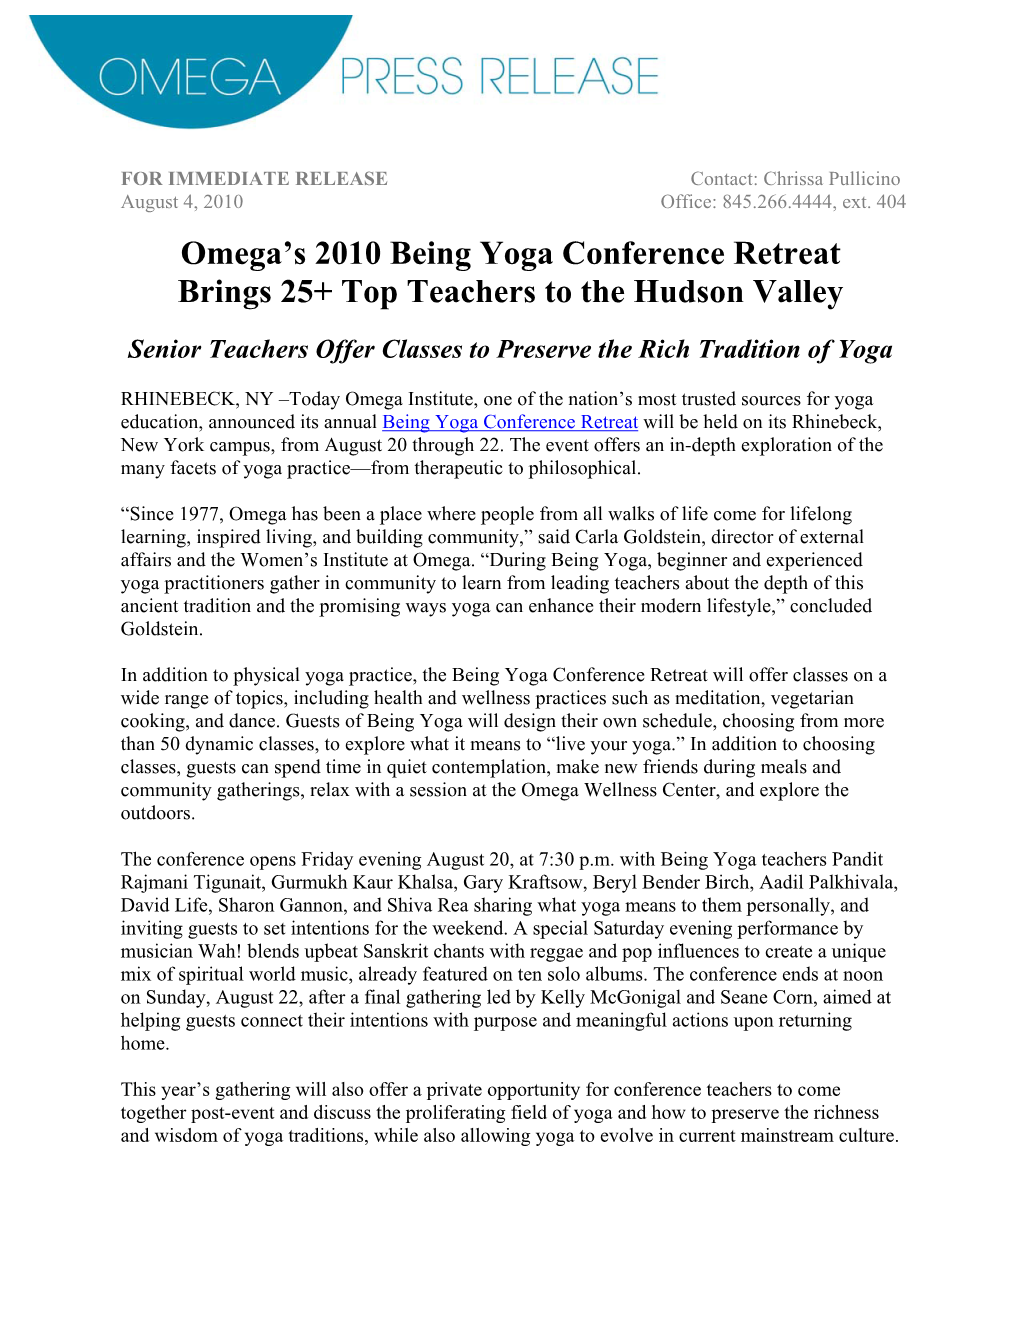 Omega's 2010 Being Yoga Conference Retreat Brings 25+ Top Teachers to the Hudson Valley